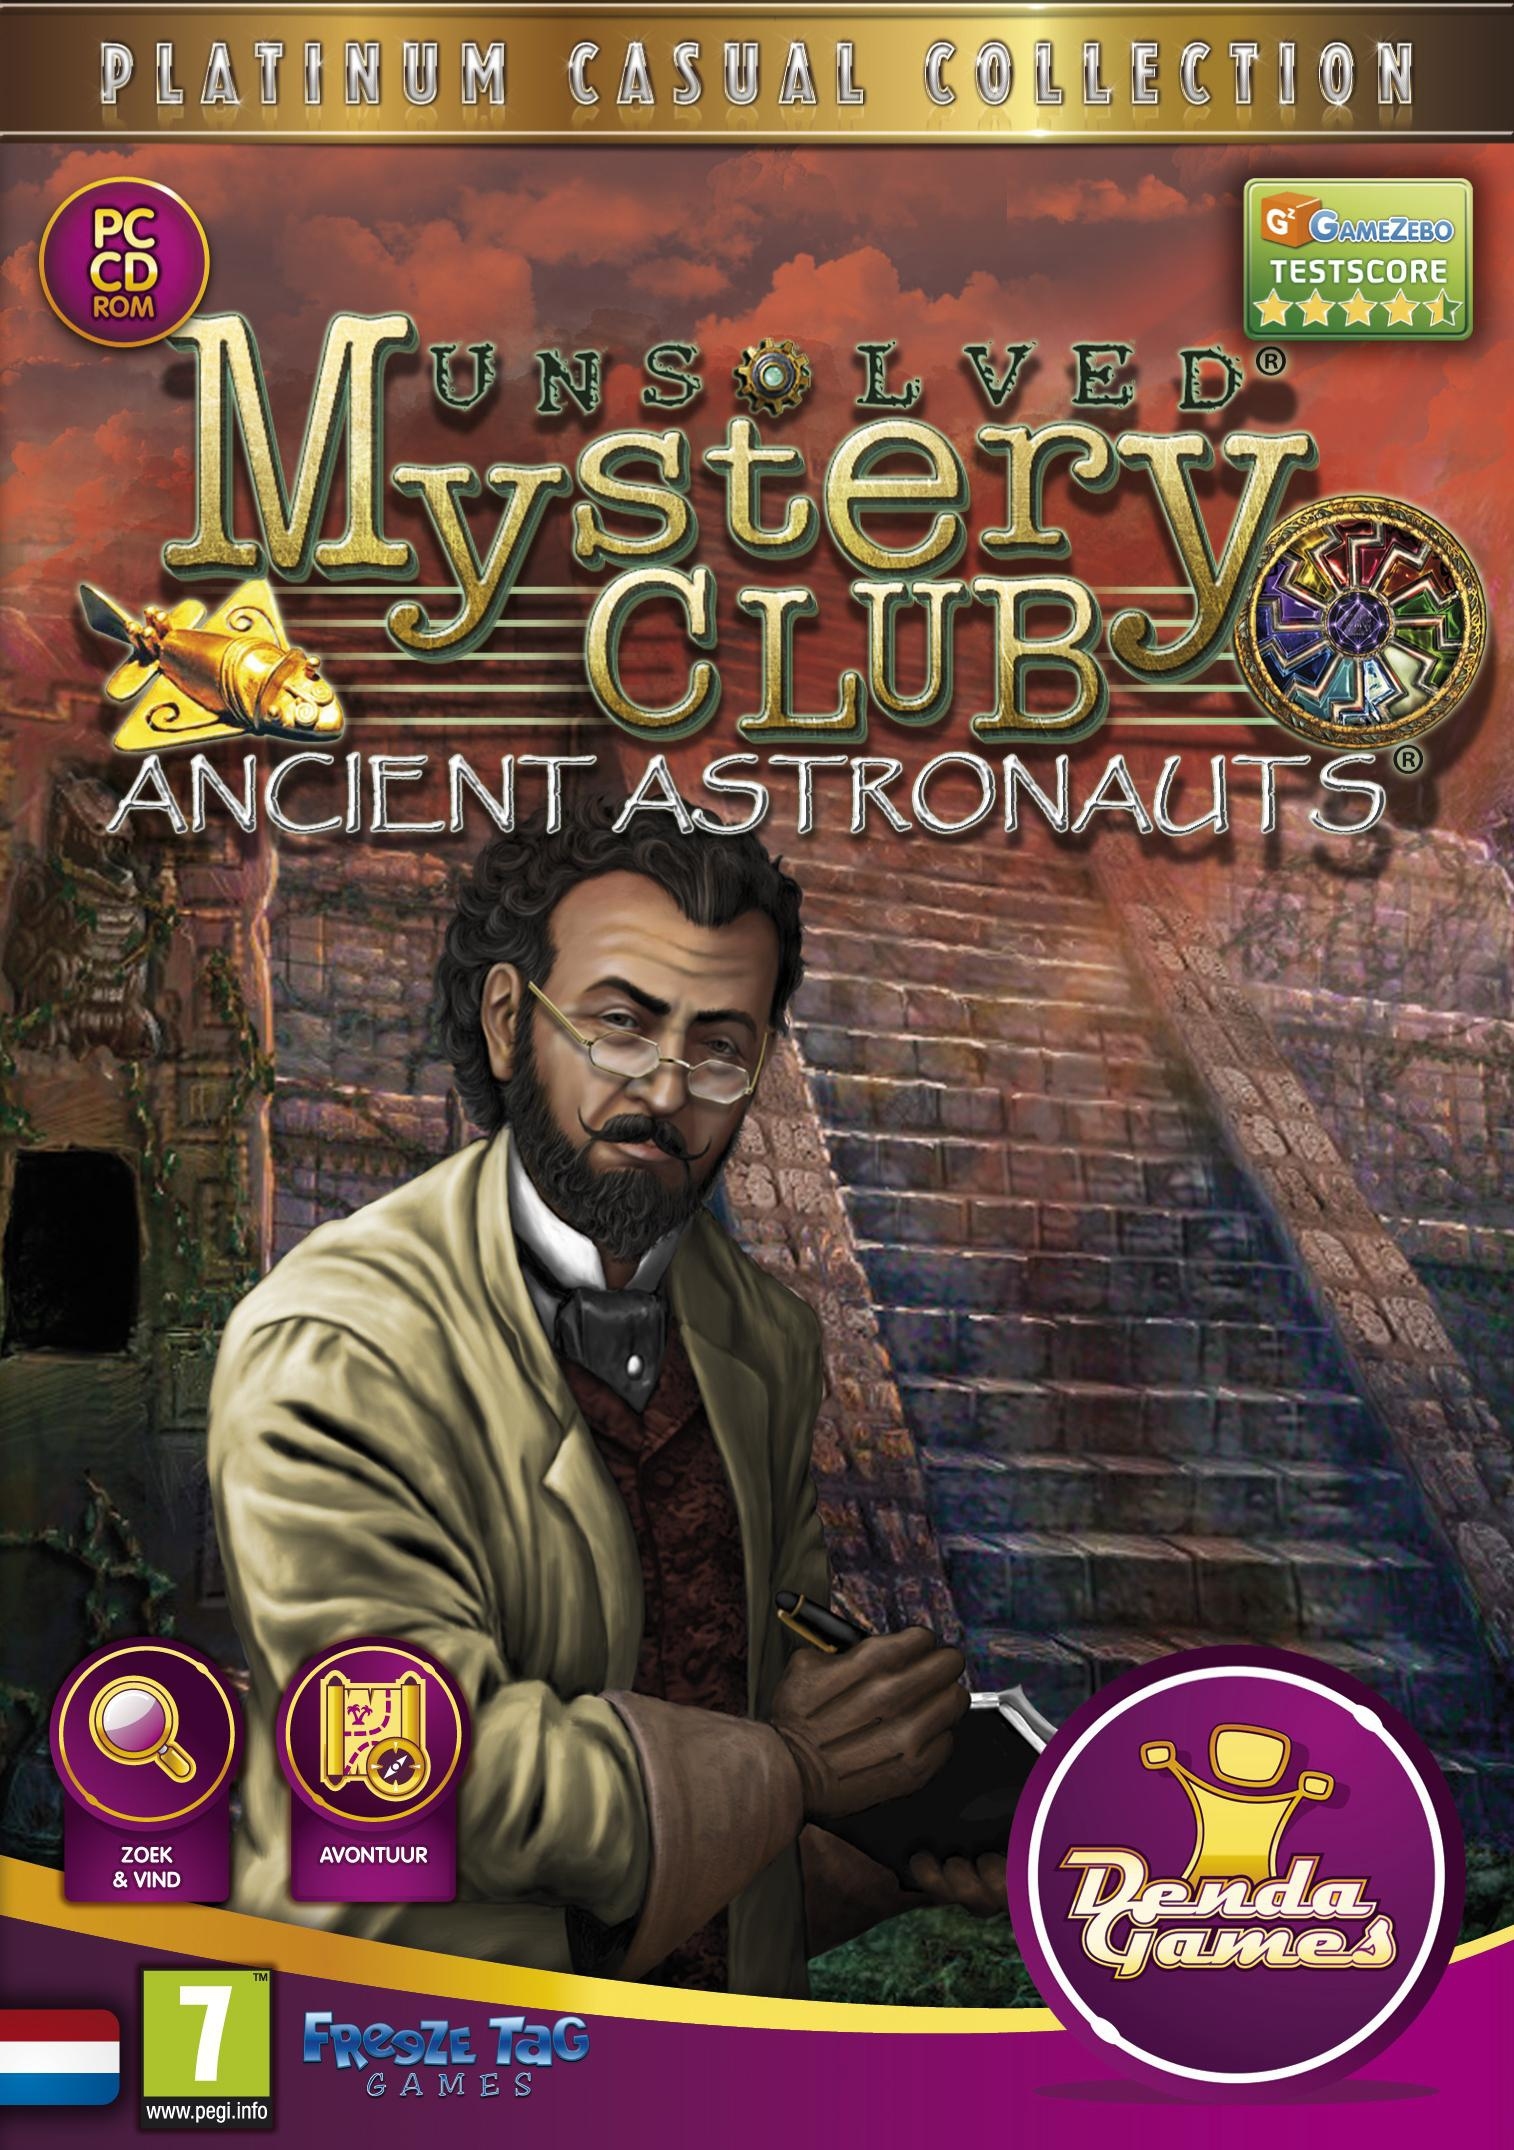 Denda Unsolved Mystery Club: Ancient Astronauts PC